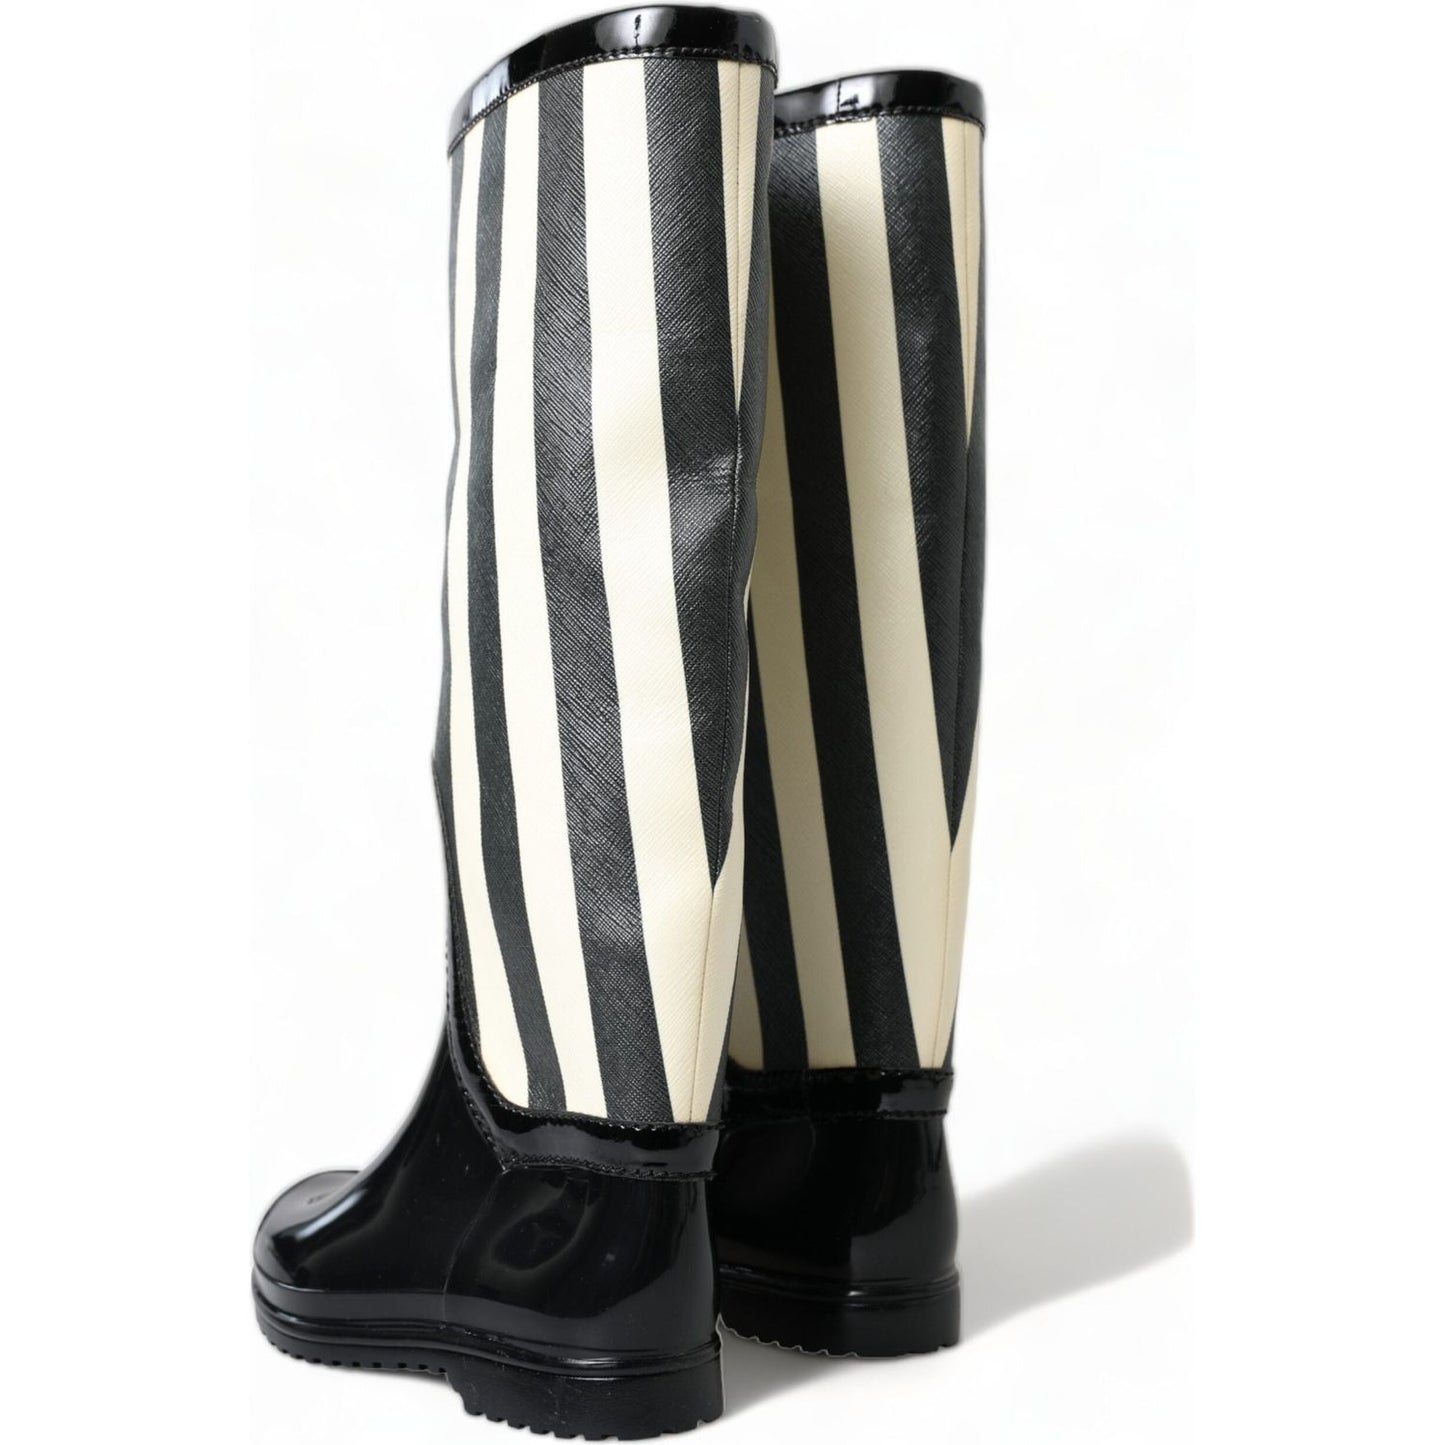 Dolce & Gabbana Black and White Striped Knee High Boots black-rubber-knee-high-flat-boots-shoes